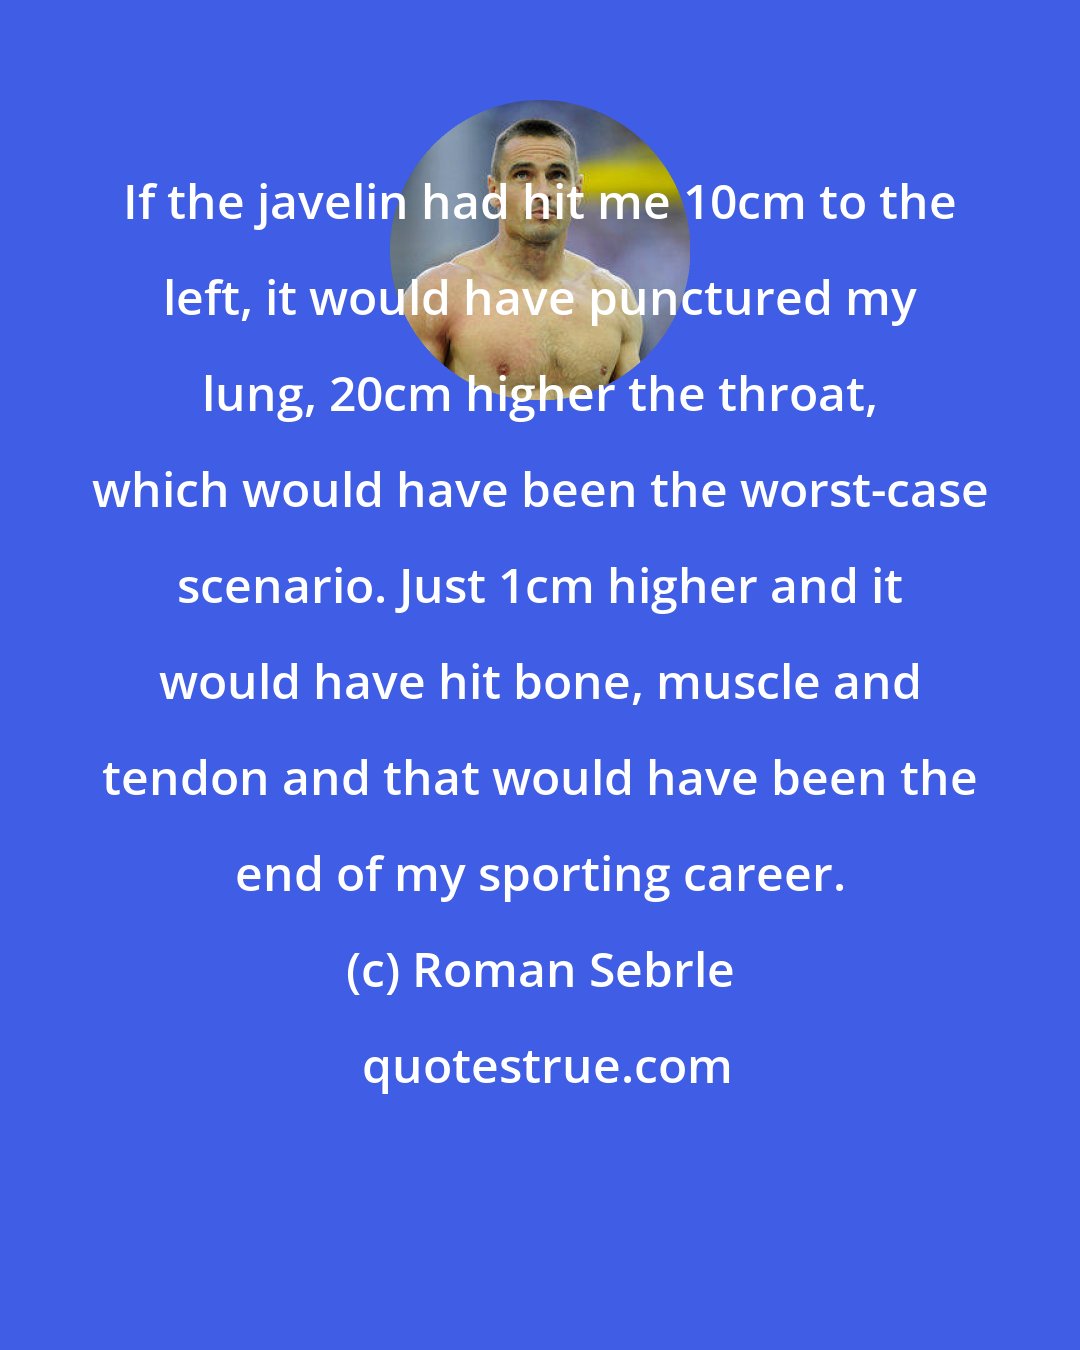 Roman Sebrle: If the javelin had hit me 10cm to the left, it would have punctured my lung, 20cm higher the throat, which would have been the worst-case scenario. Just 1cm higher and it would have hit bone, muscle and tendon and that would have been the end of my sporting career.